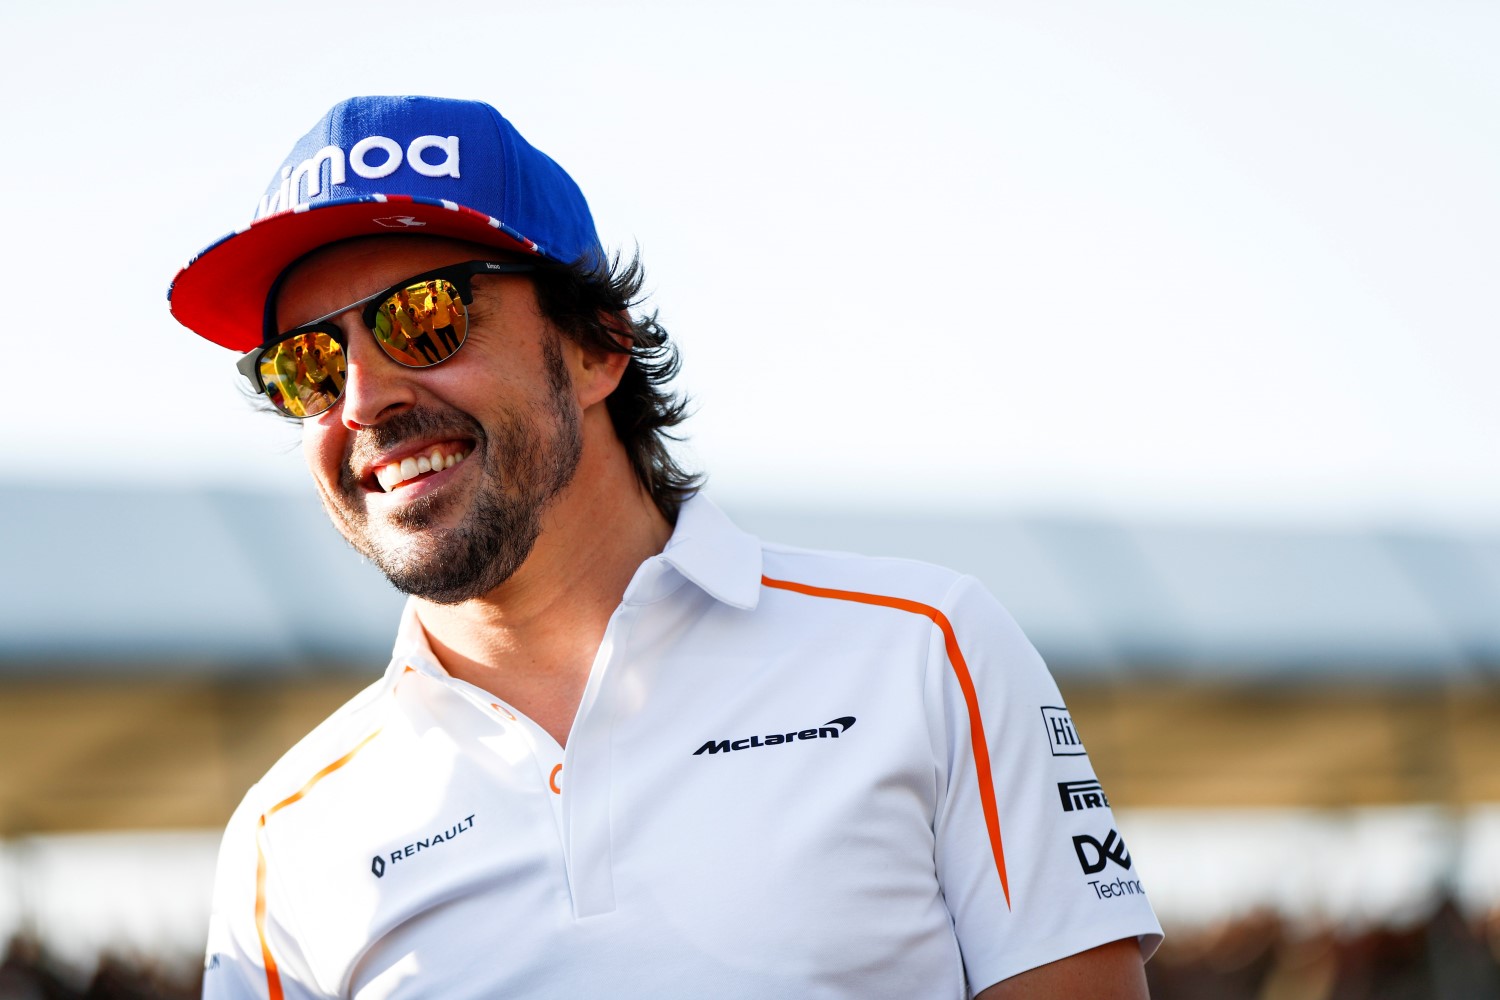 Alonso is not going to drive for just any team